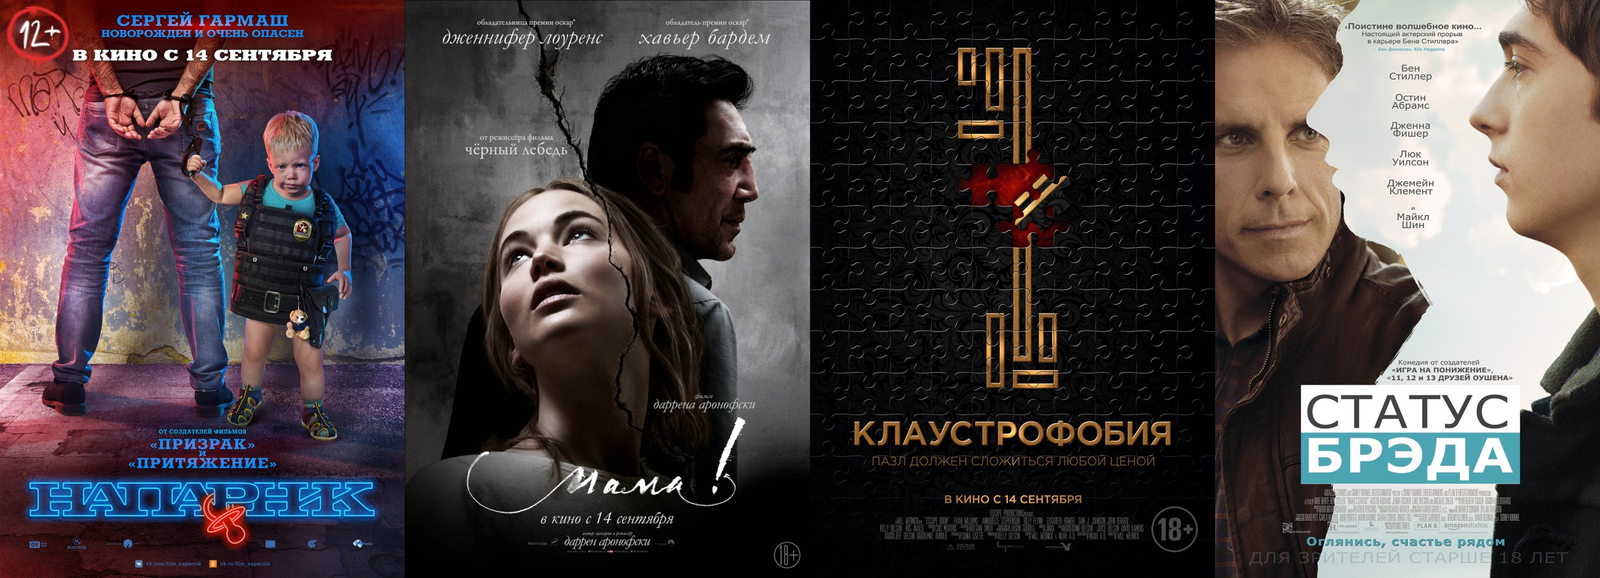 Russian box office receipts and distribution of screenings over the past weekend (September 14 - 17) - Movies, Box office fees, Partner, Mum, Claustrophobia, , Film distribution